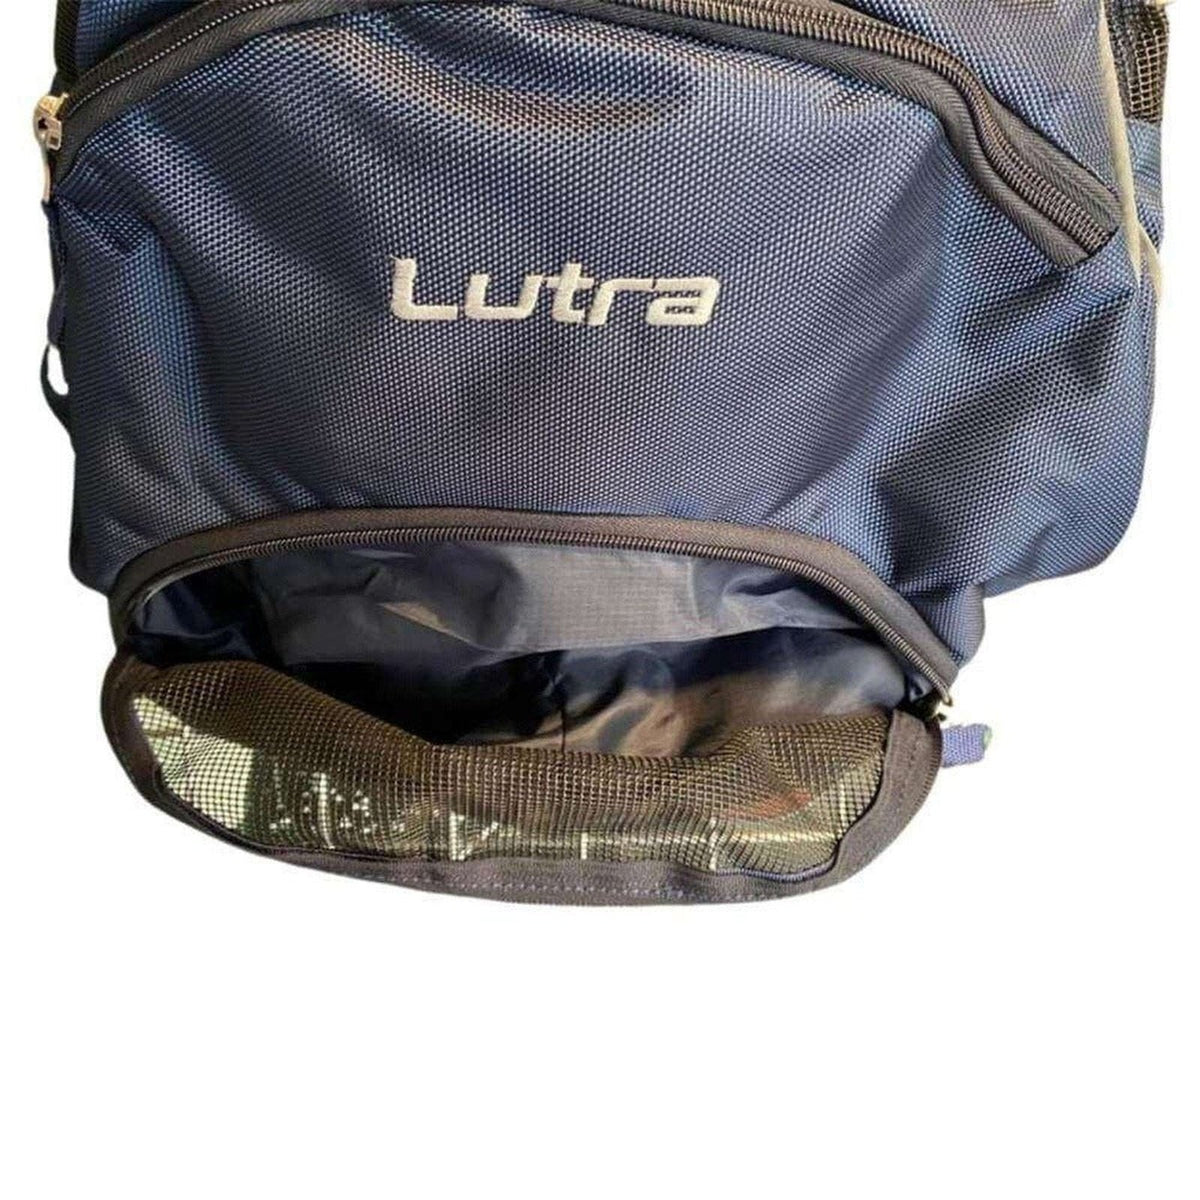 Fusion Tri - Lutra Premium Team Backpack 45 litre - Navy